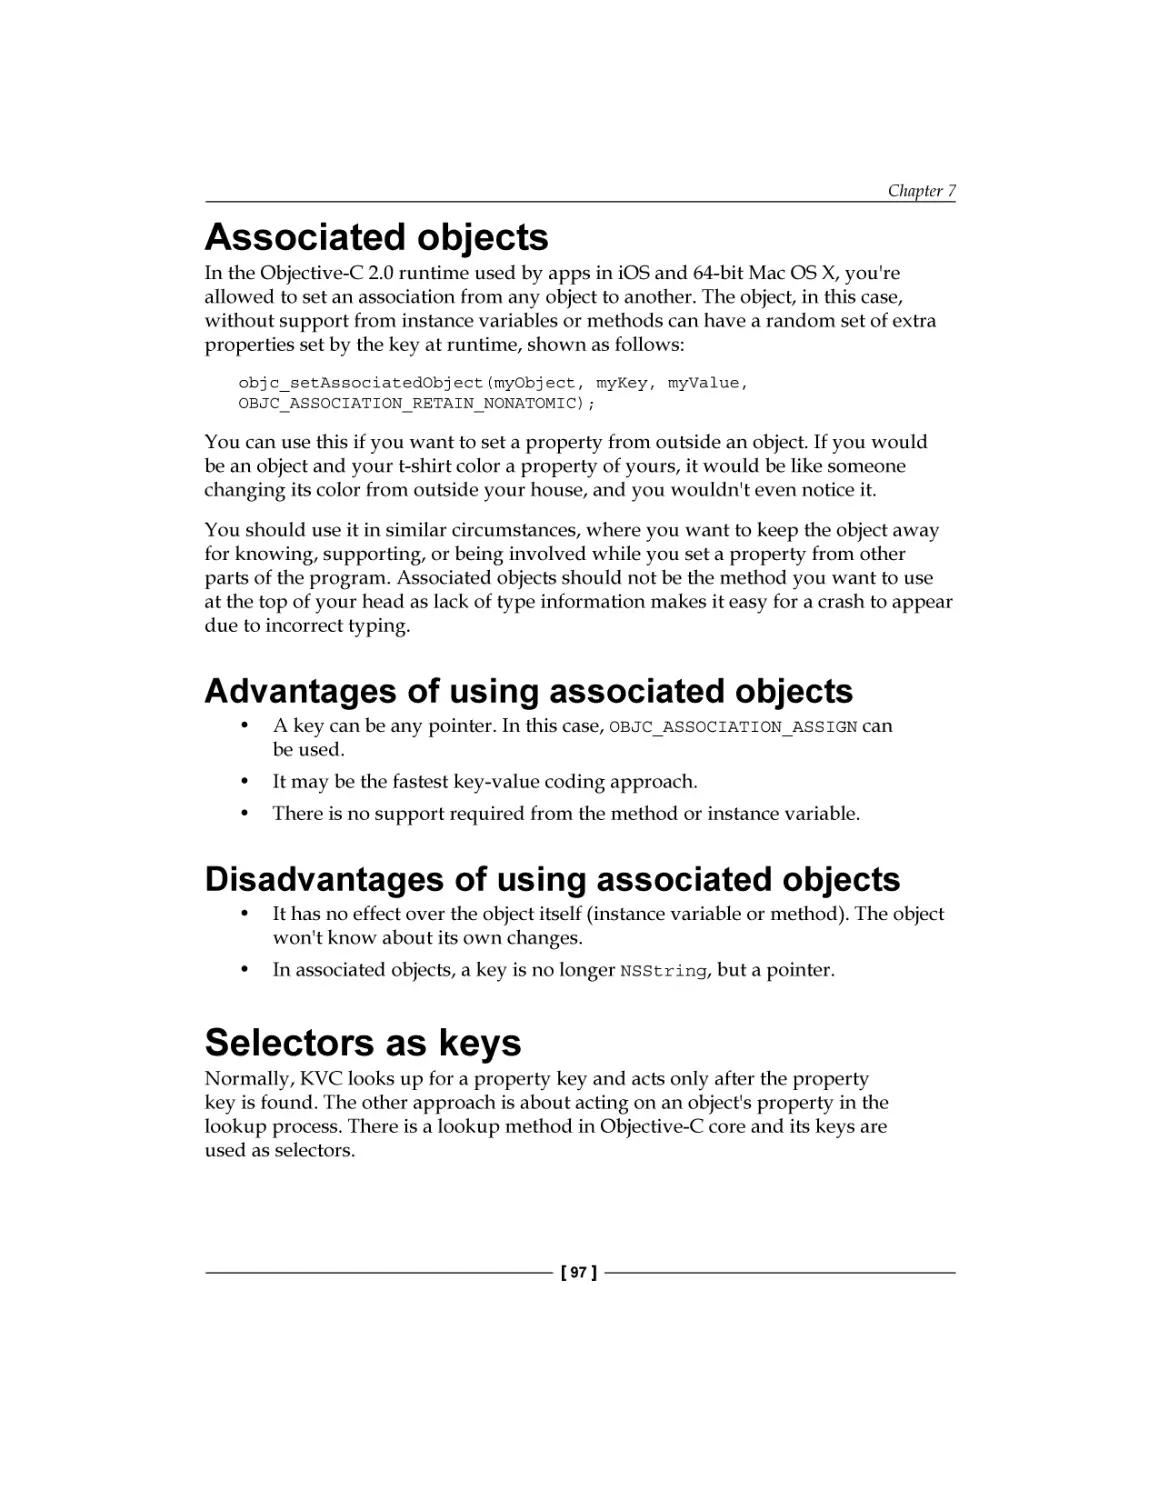 Associated objects
Advantages of using associated objects
Disadvantages of using associated objects
Selectors as keys